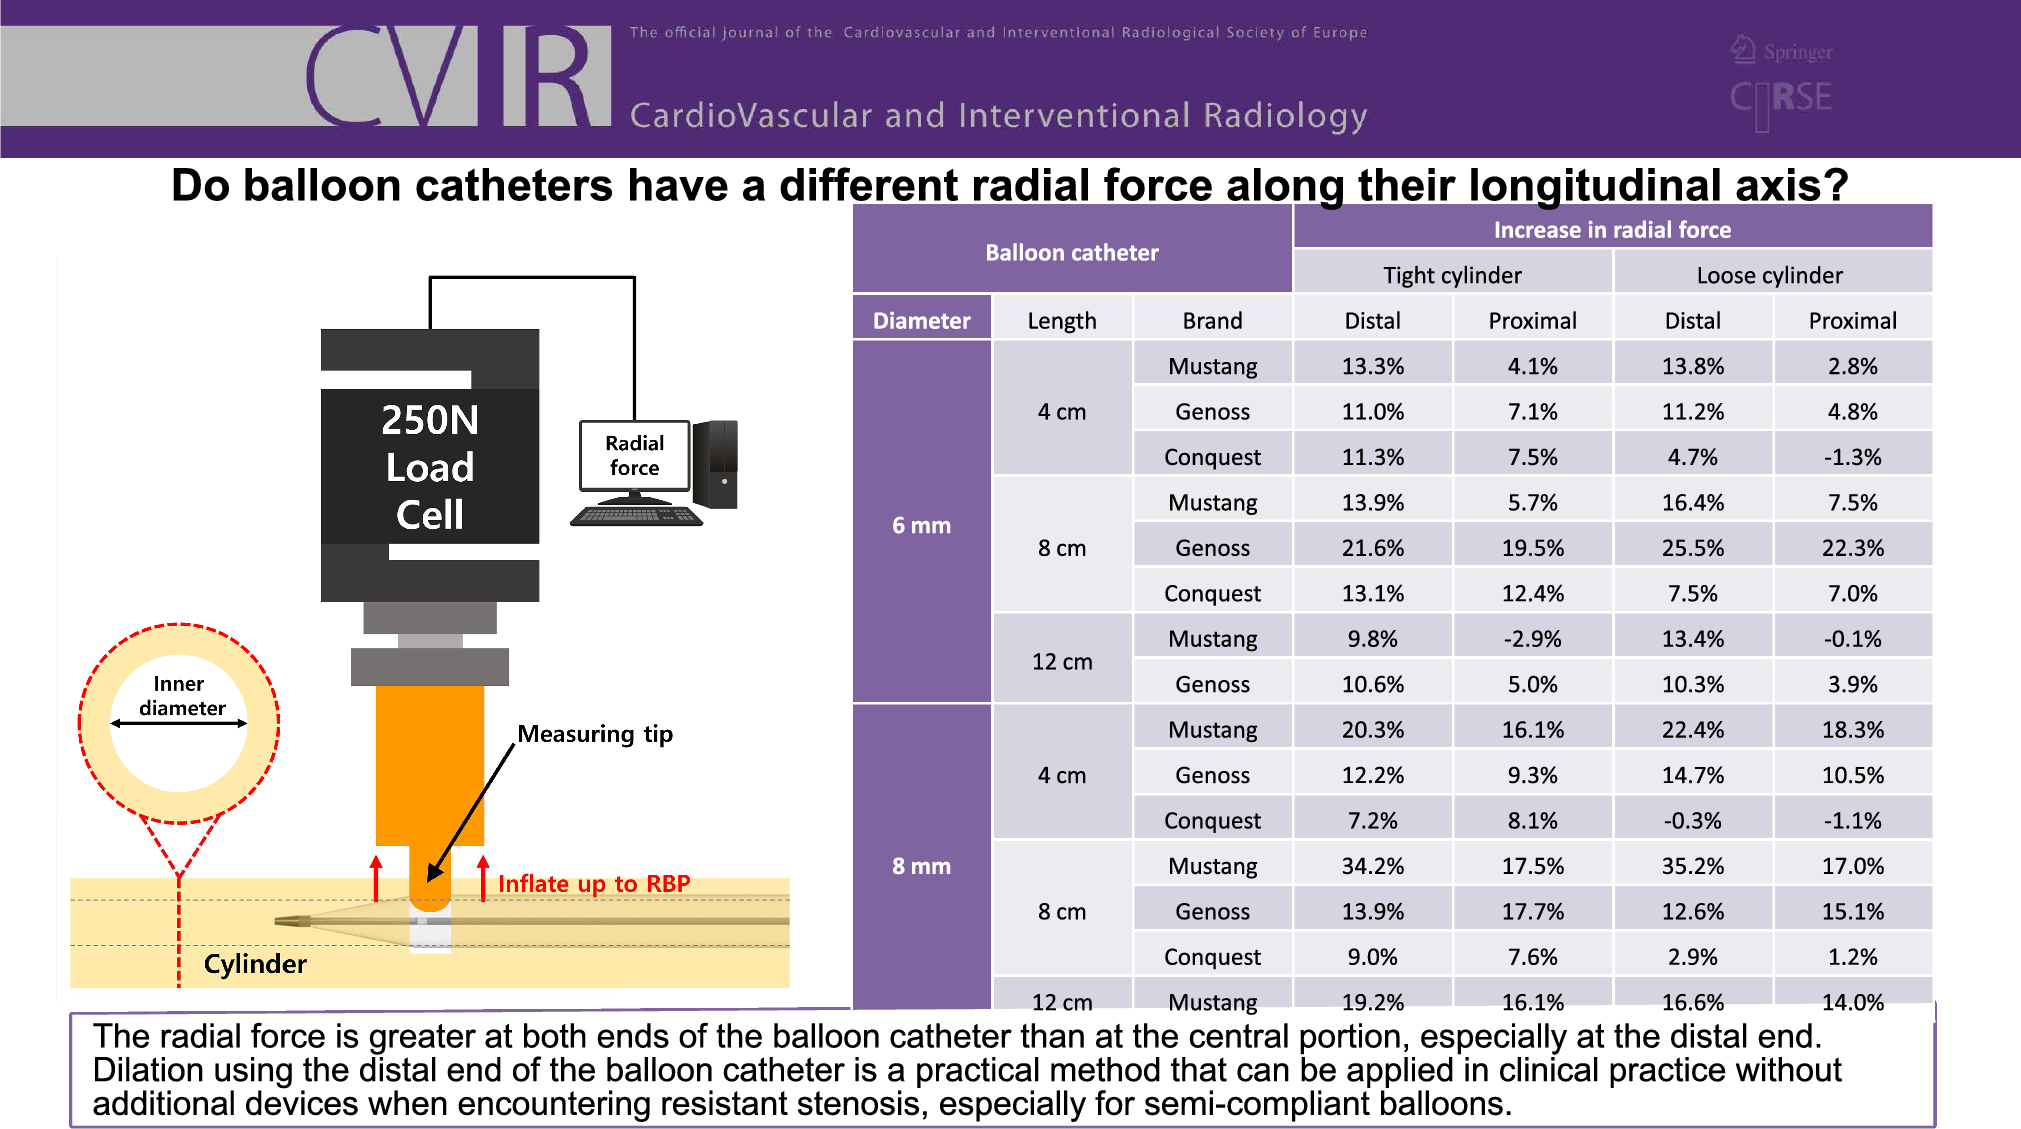 Do Balloon Catheters have a Different Radial Force Along Their Longitudinal Axis?